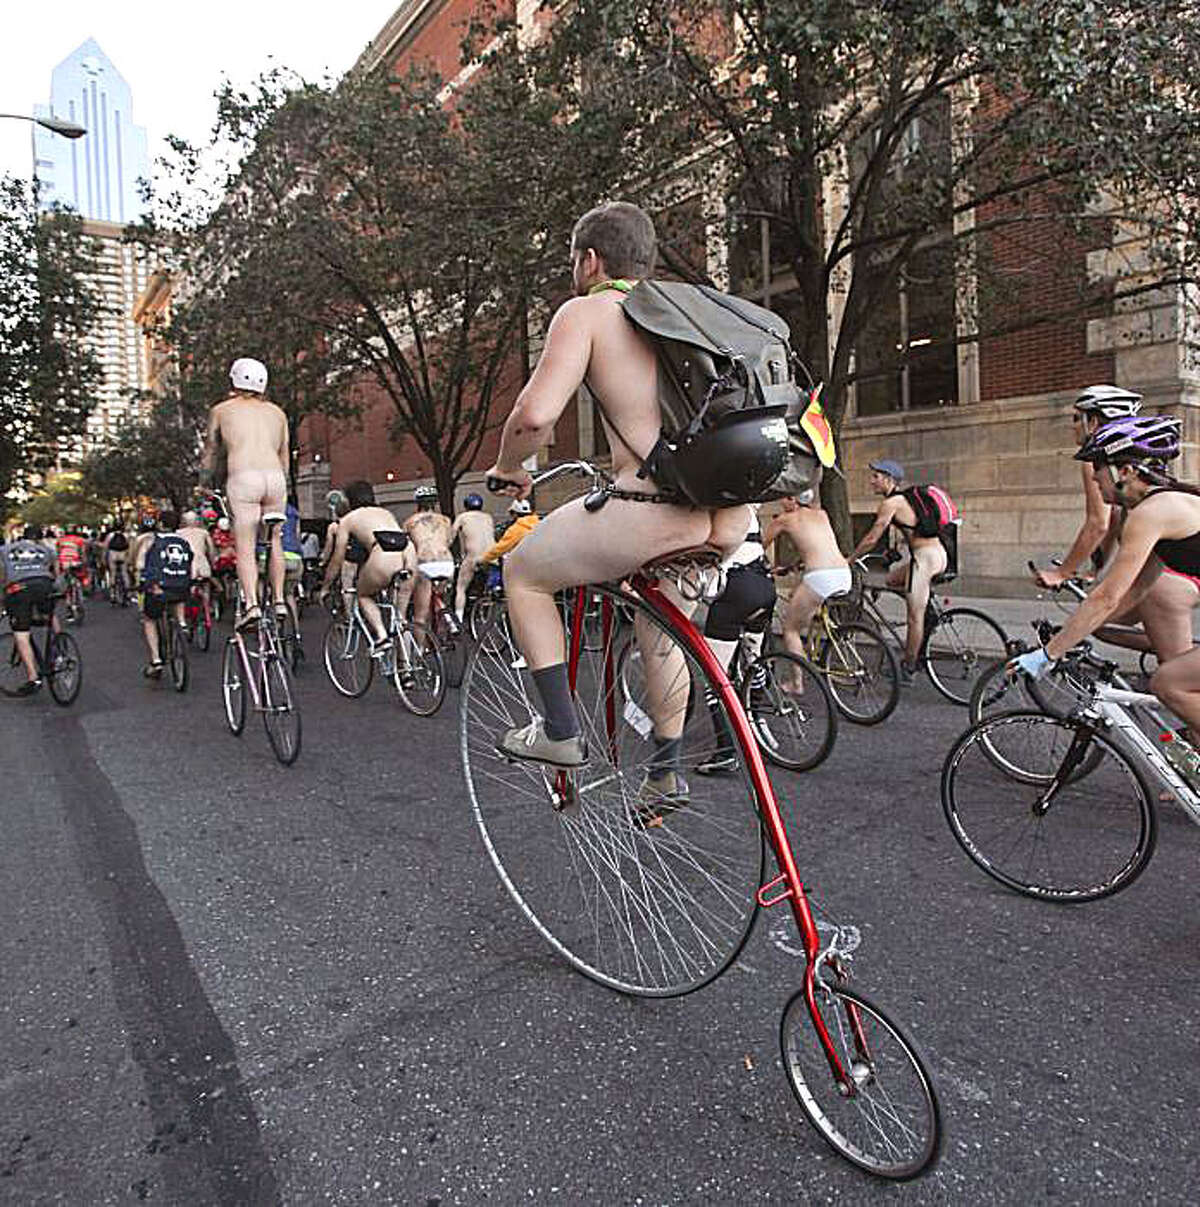 Cyclist make their way through the streets of center city Philadelphia during a naked bike ride on Sunday Sept. 5, 2010.